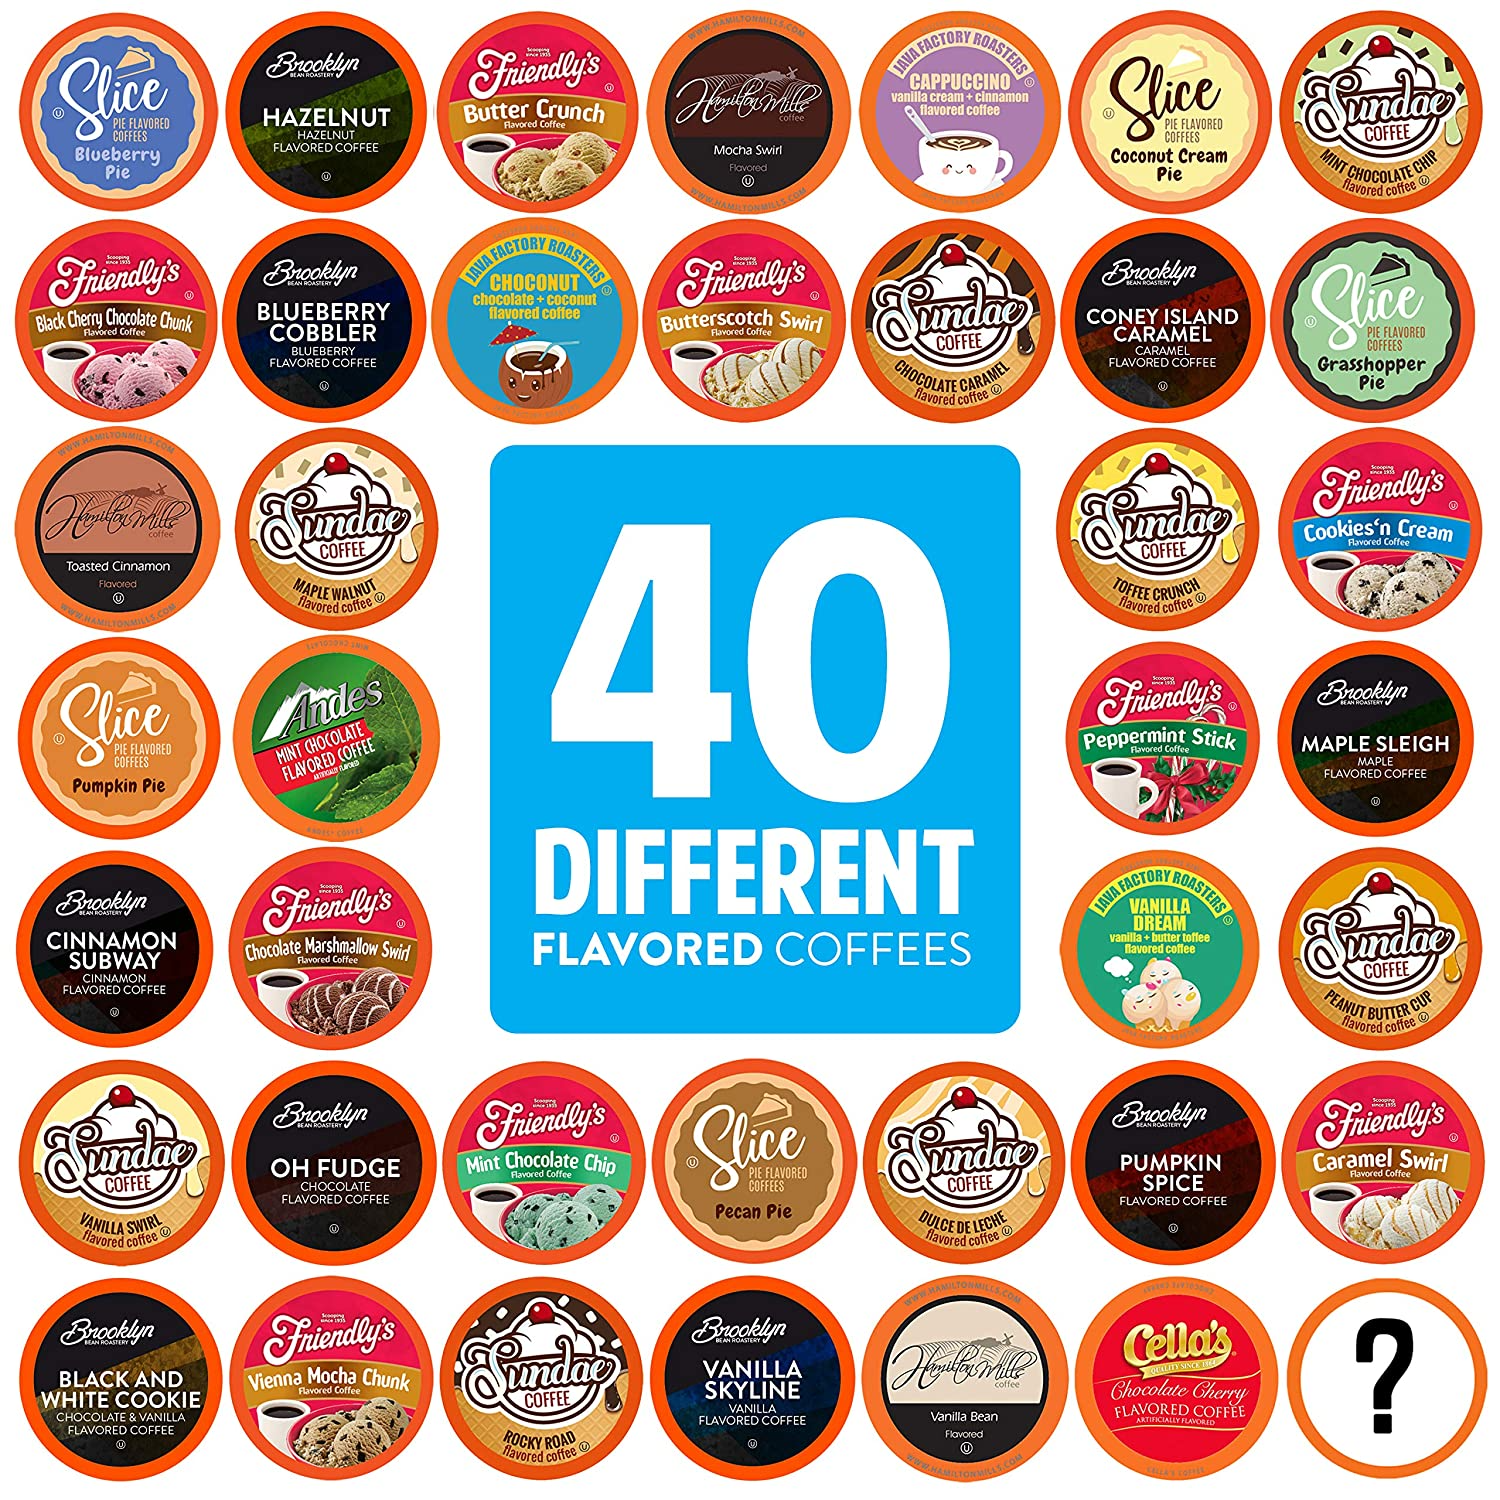 The 40 flavor varieties of the coffee pods